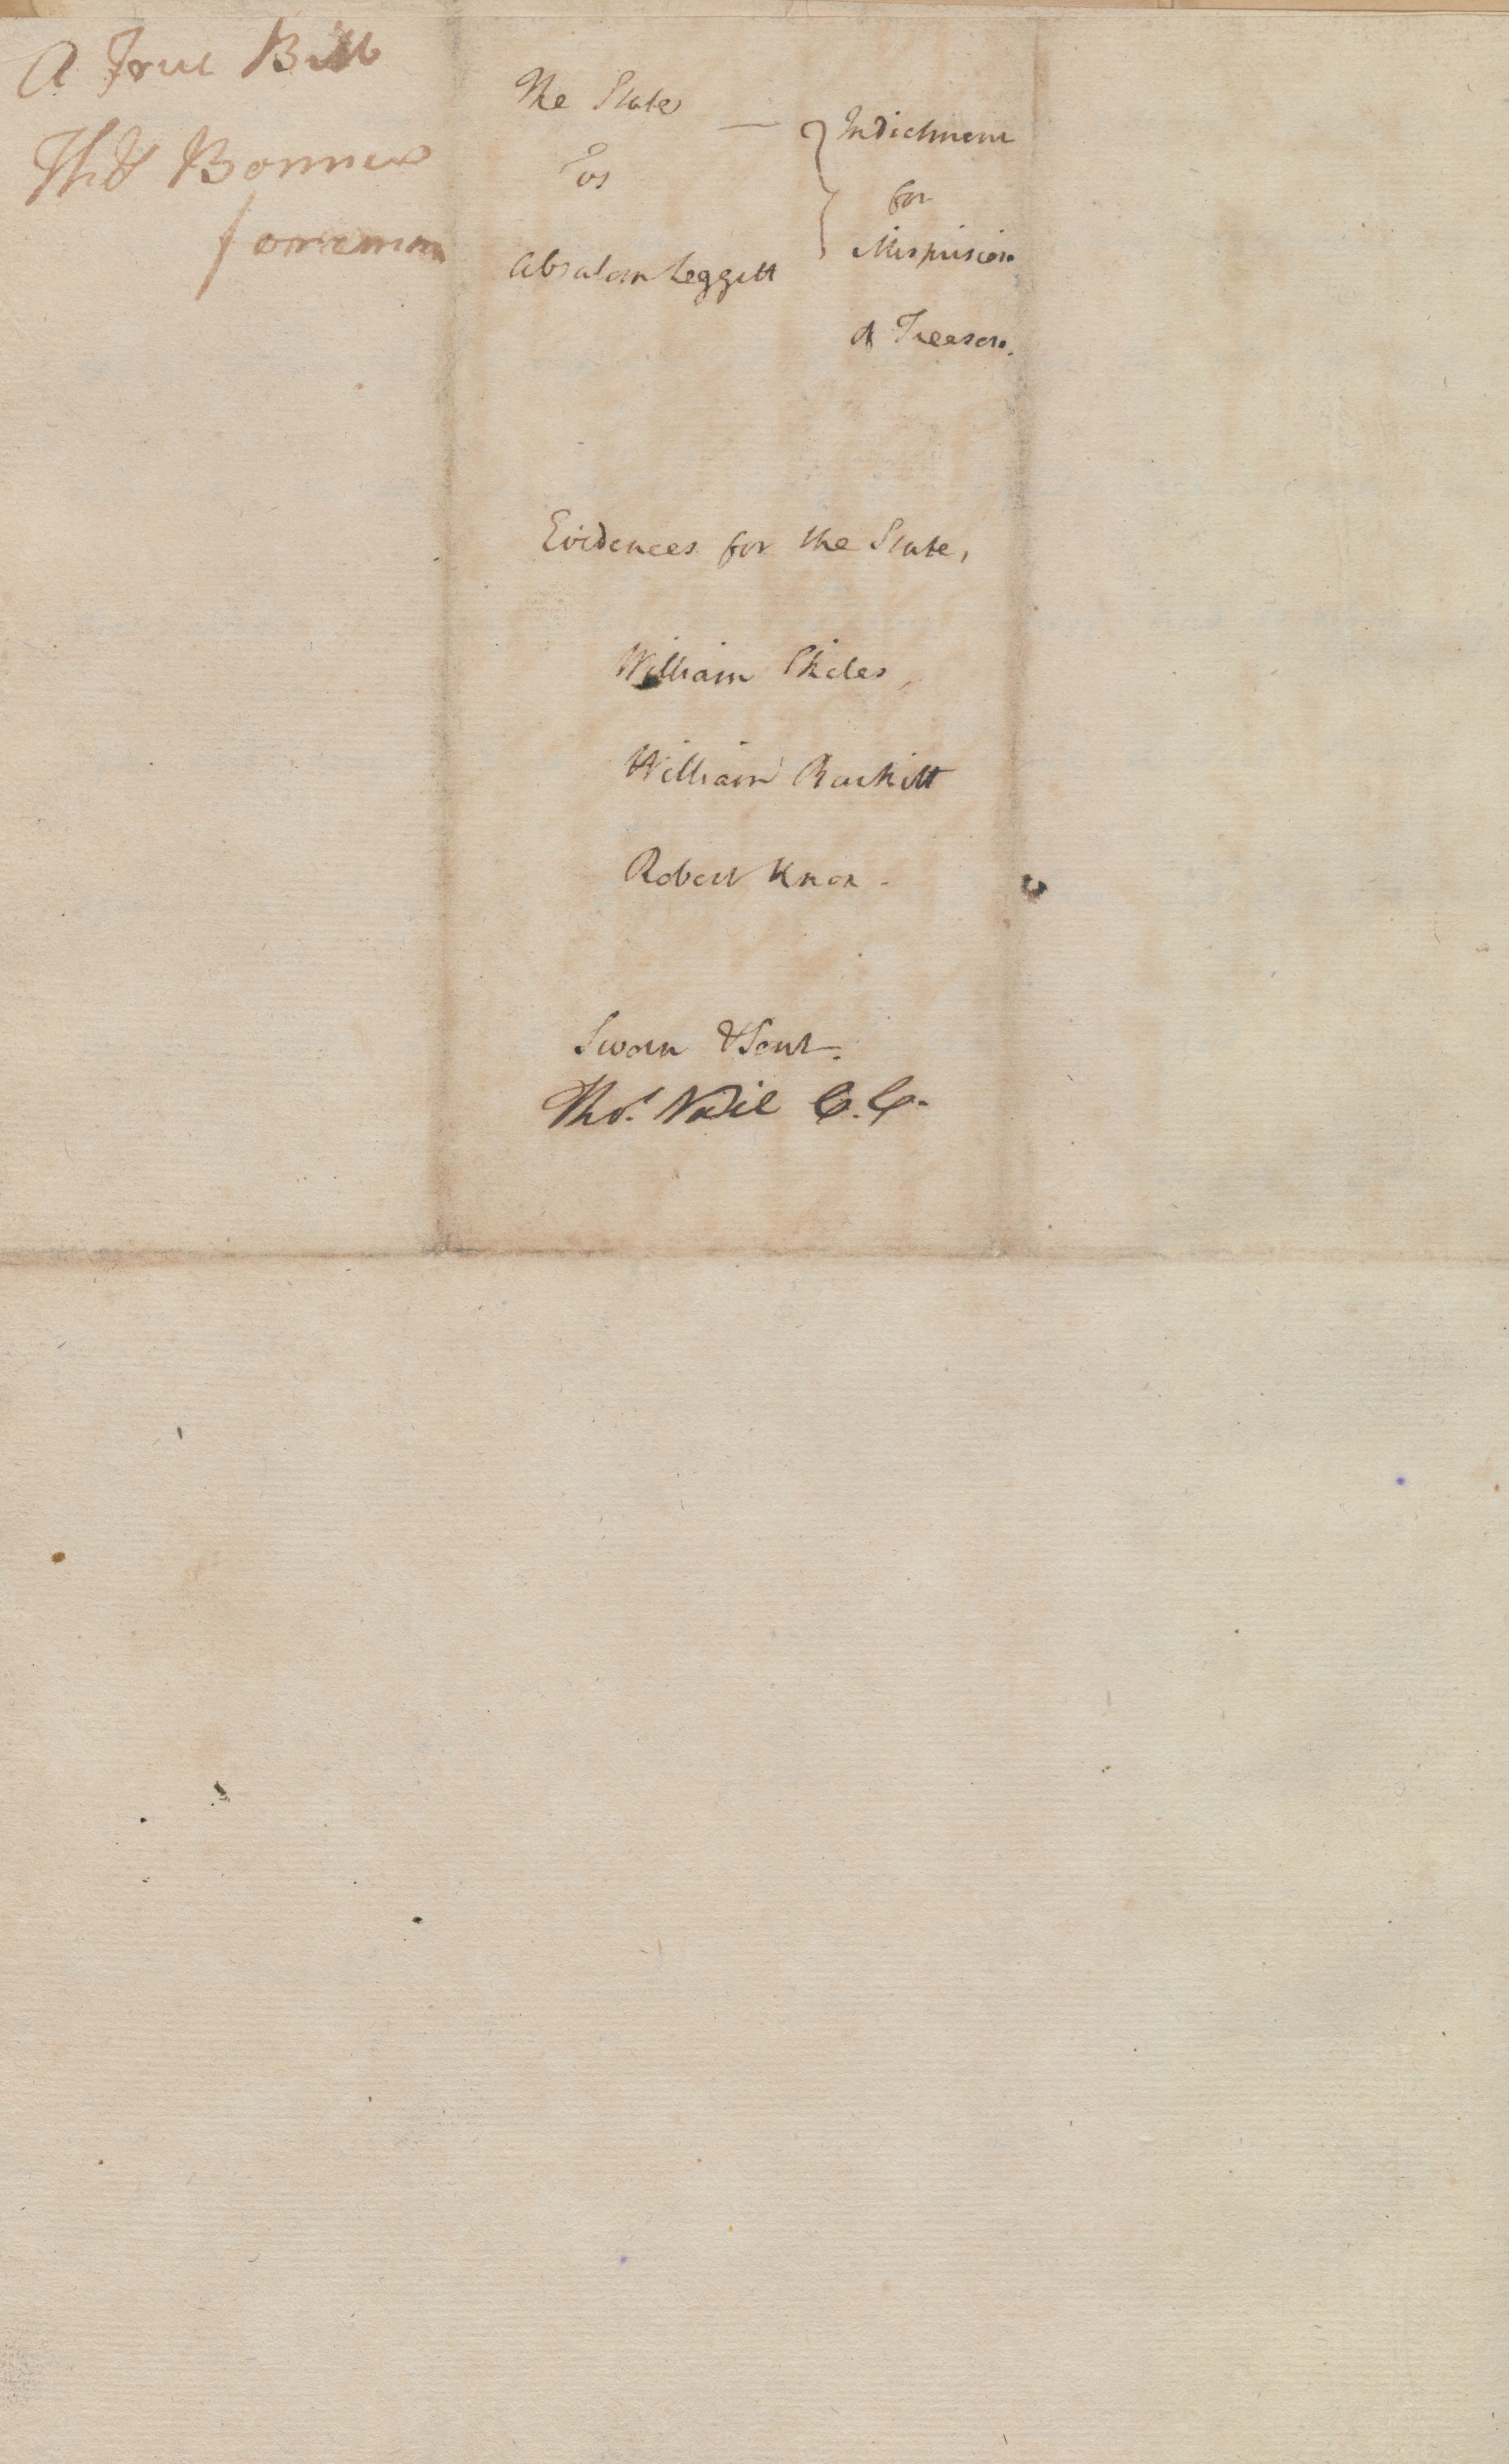 Indictment from the Edenton District Court against Absalom Leggett, 16 September 1777, page 3